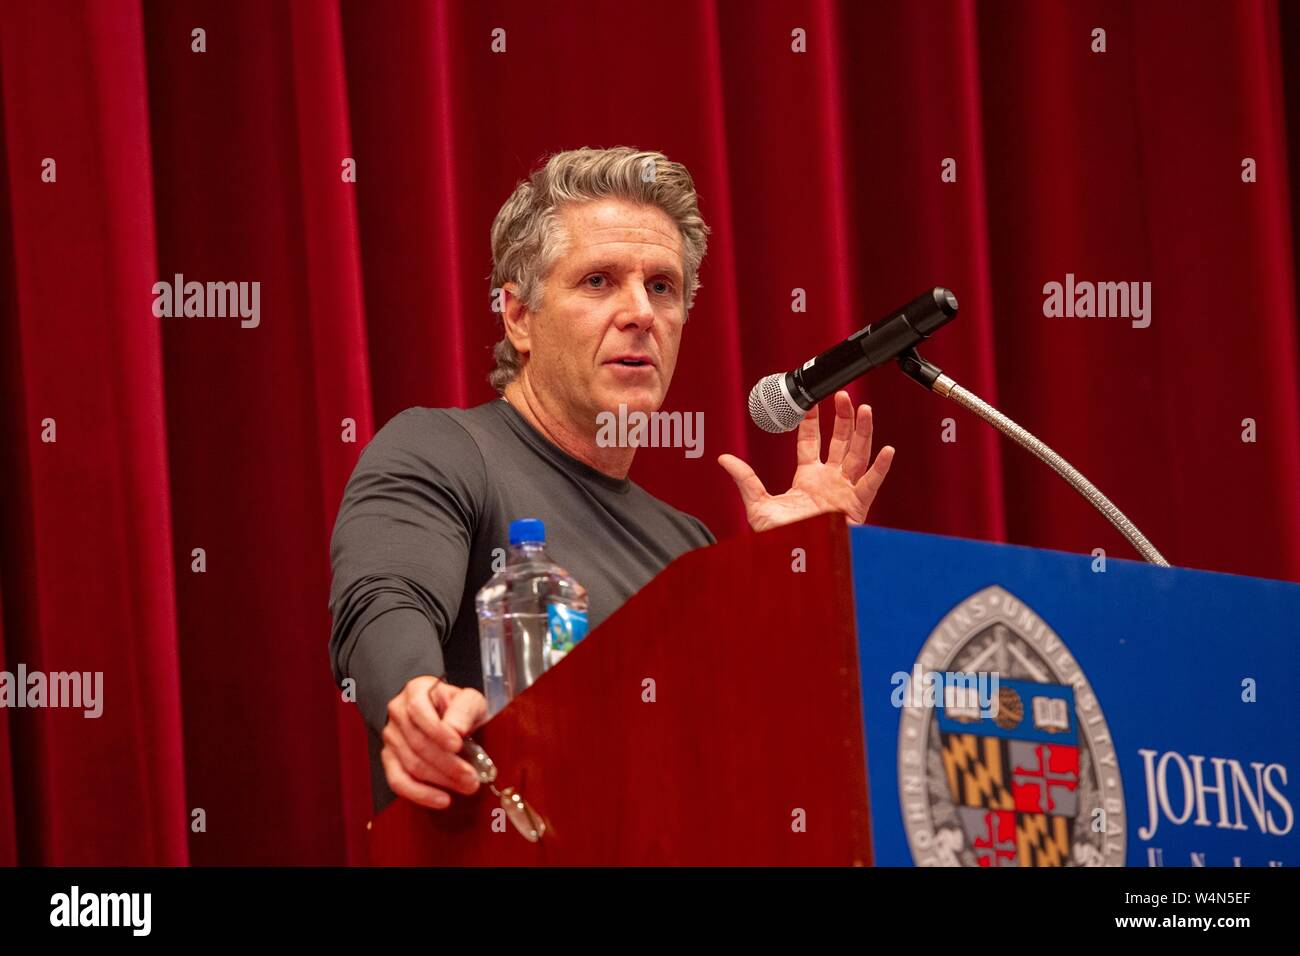 Donny Deutsch, marketing professional and television personality, speaking during a Milton S Eisenhower Symposium at the Johns Hopkins University, Baltimore, Maryland, November 9, 2010. From the Homewood Photography Collection. () Stock Photo